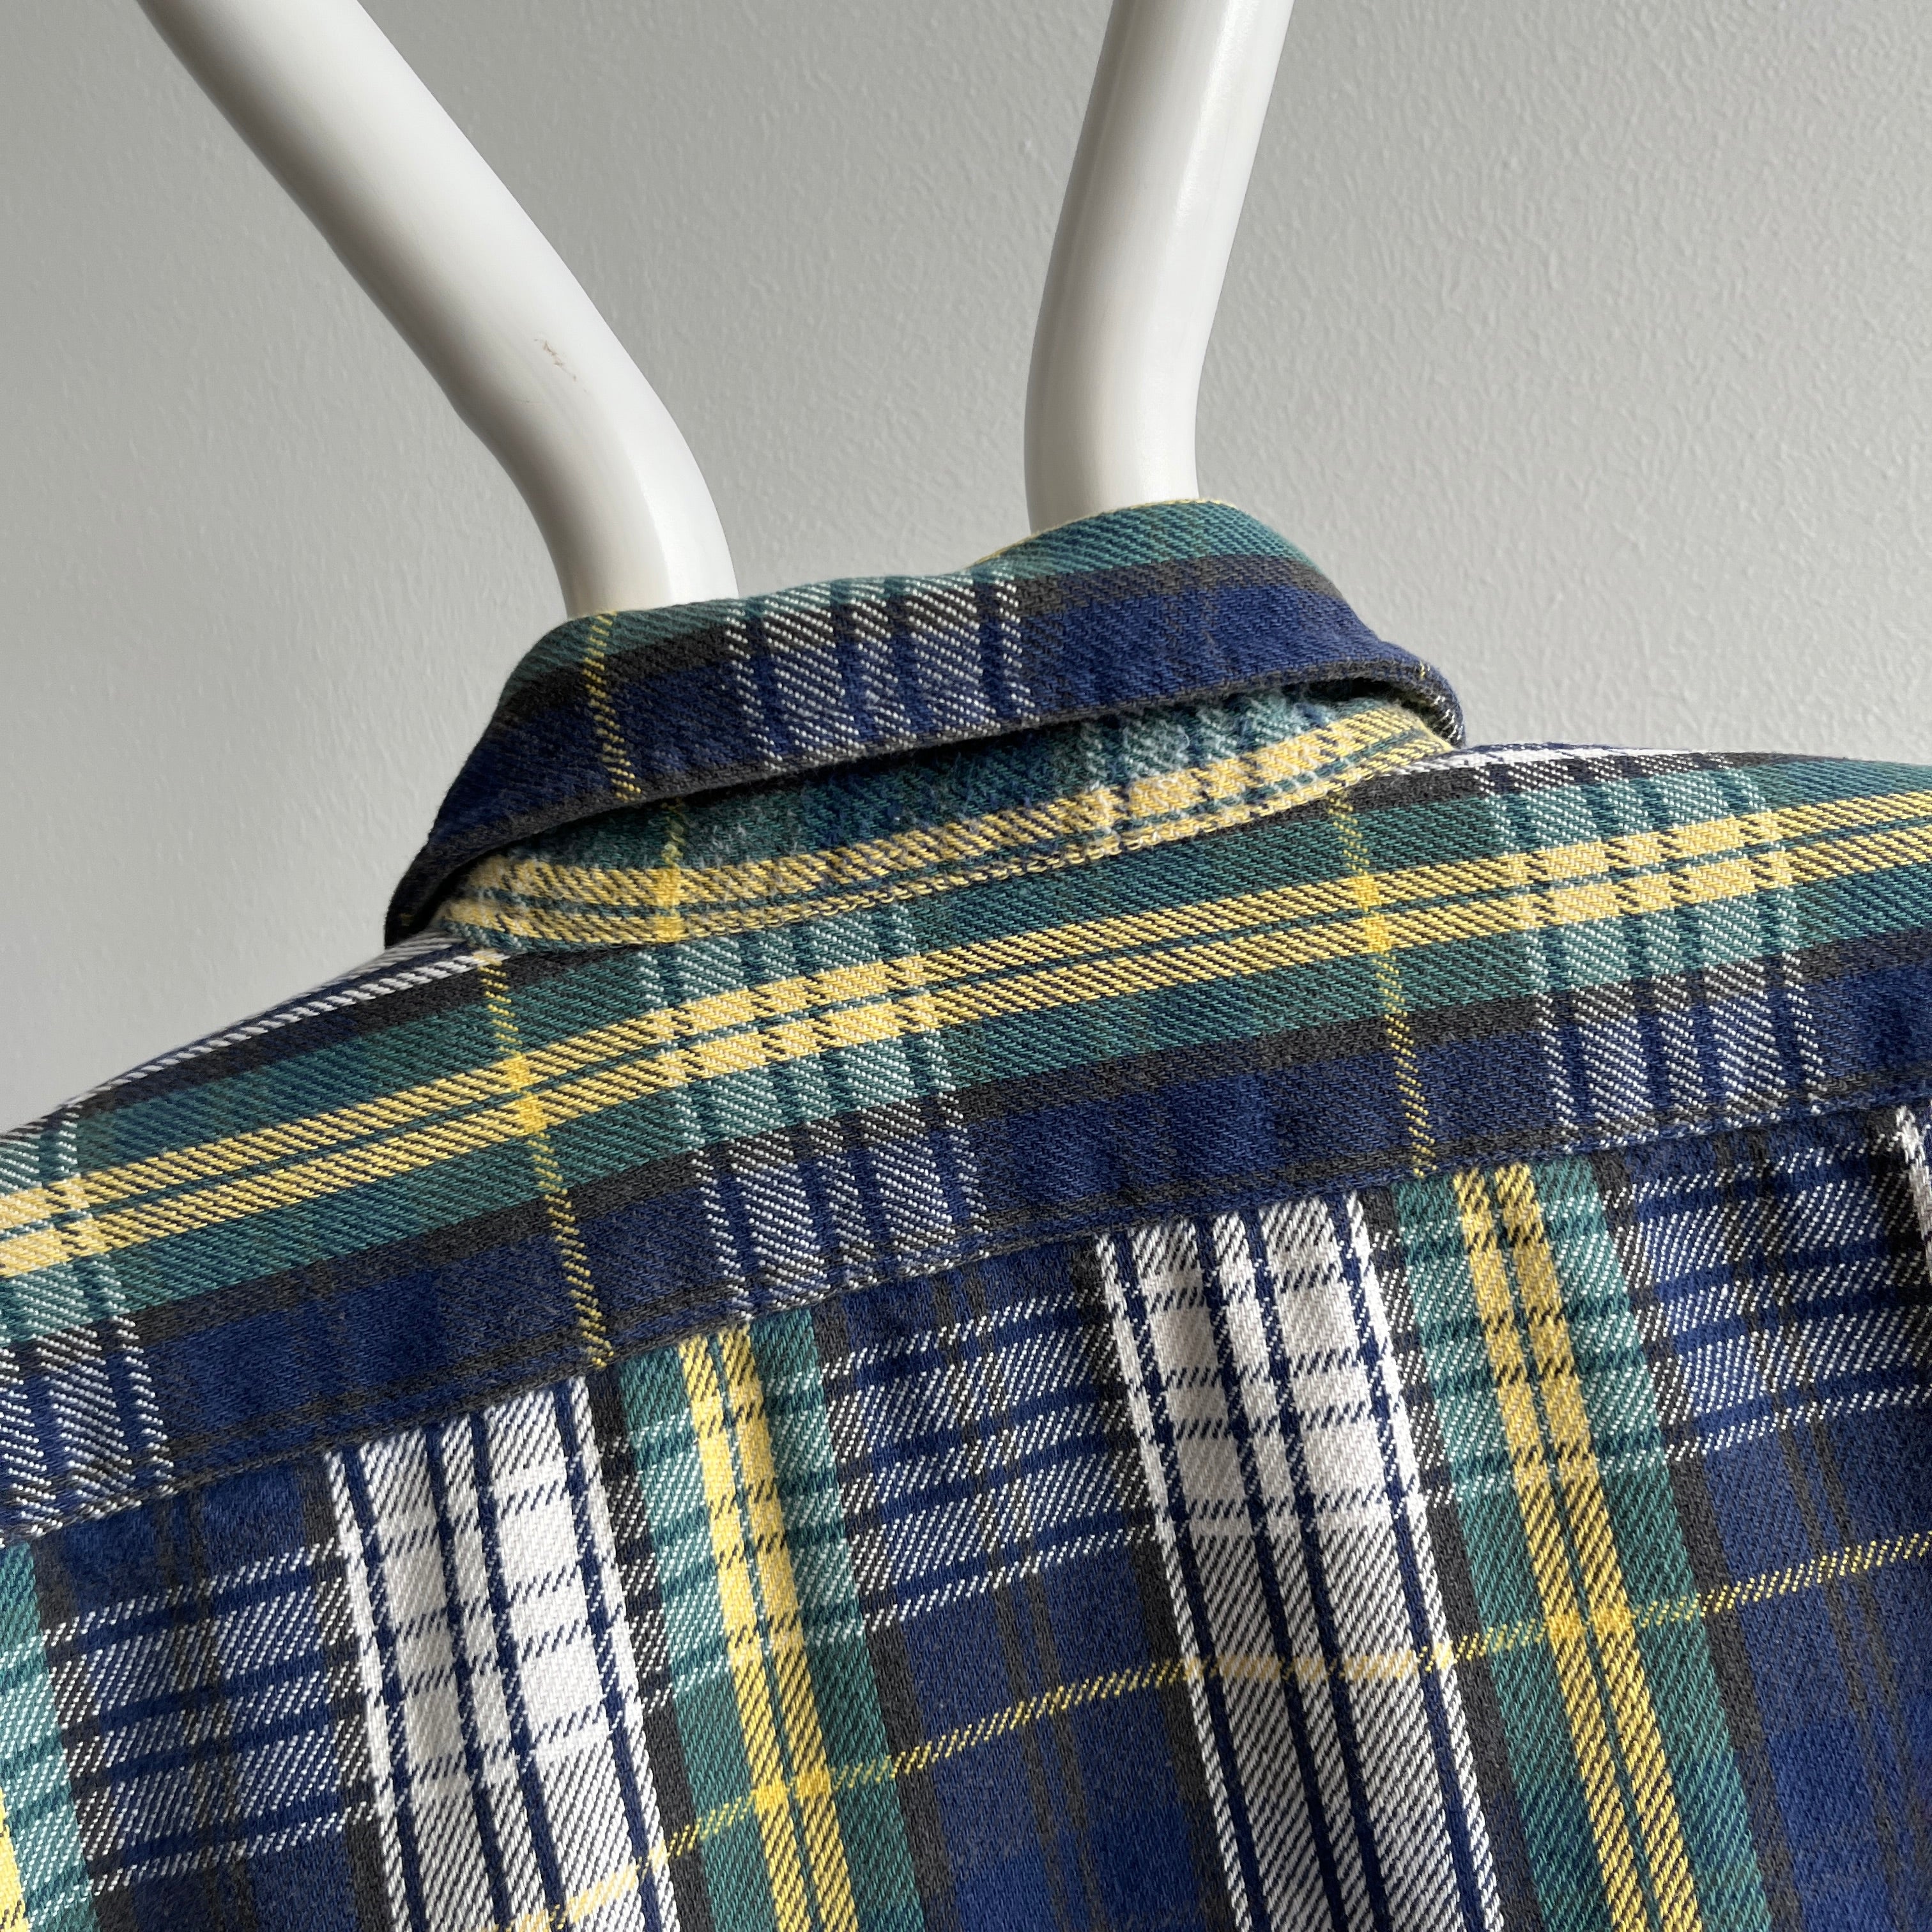 1980s Work N' Sport Blue and Yellow Cotton Plaid Flannel